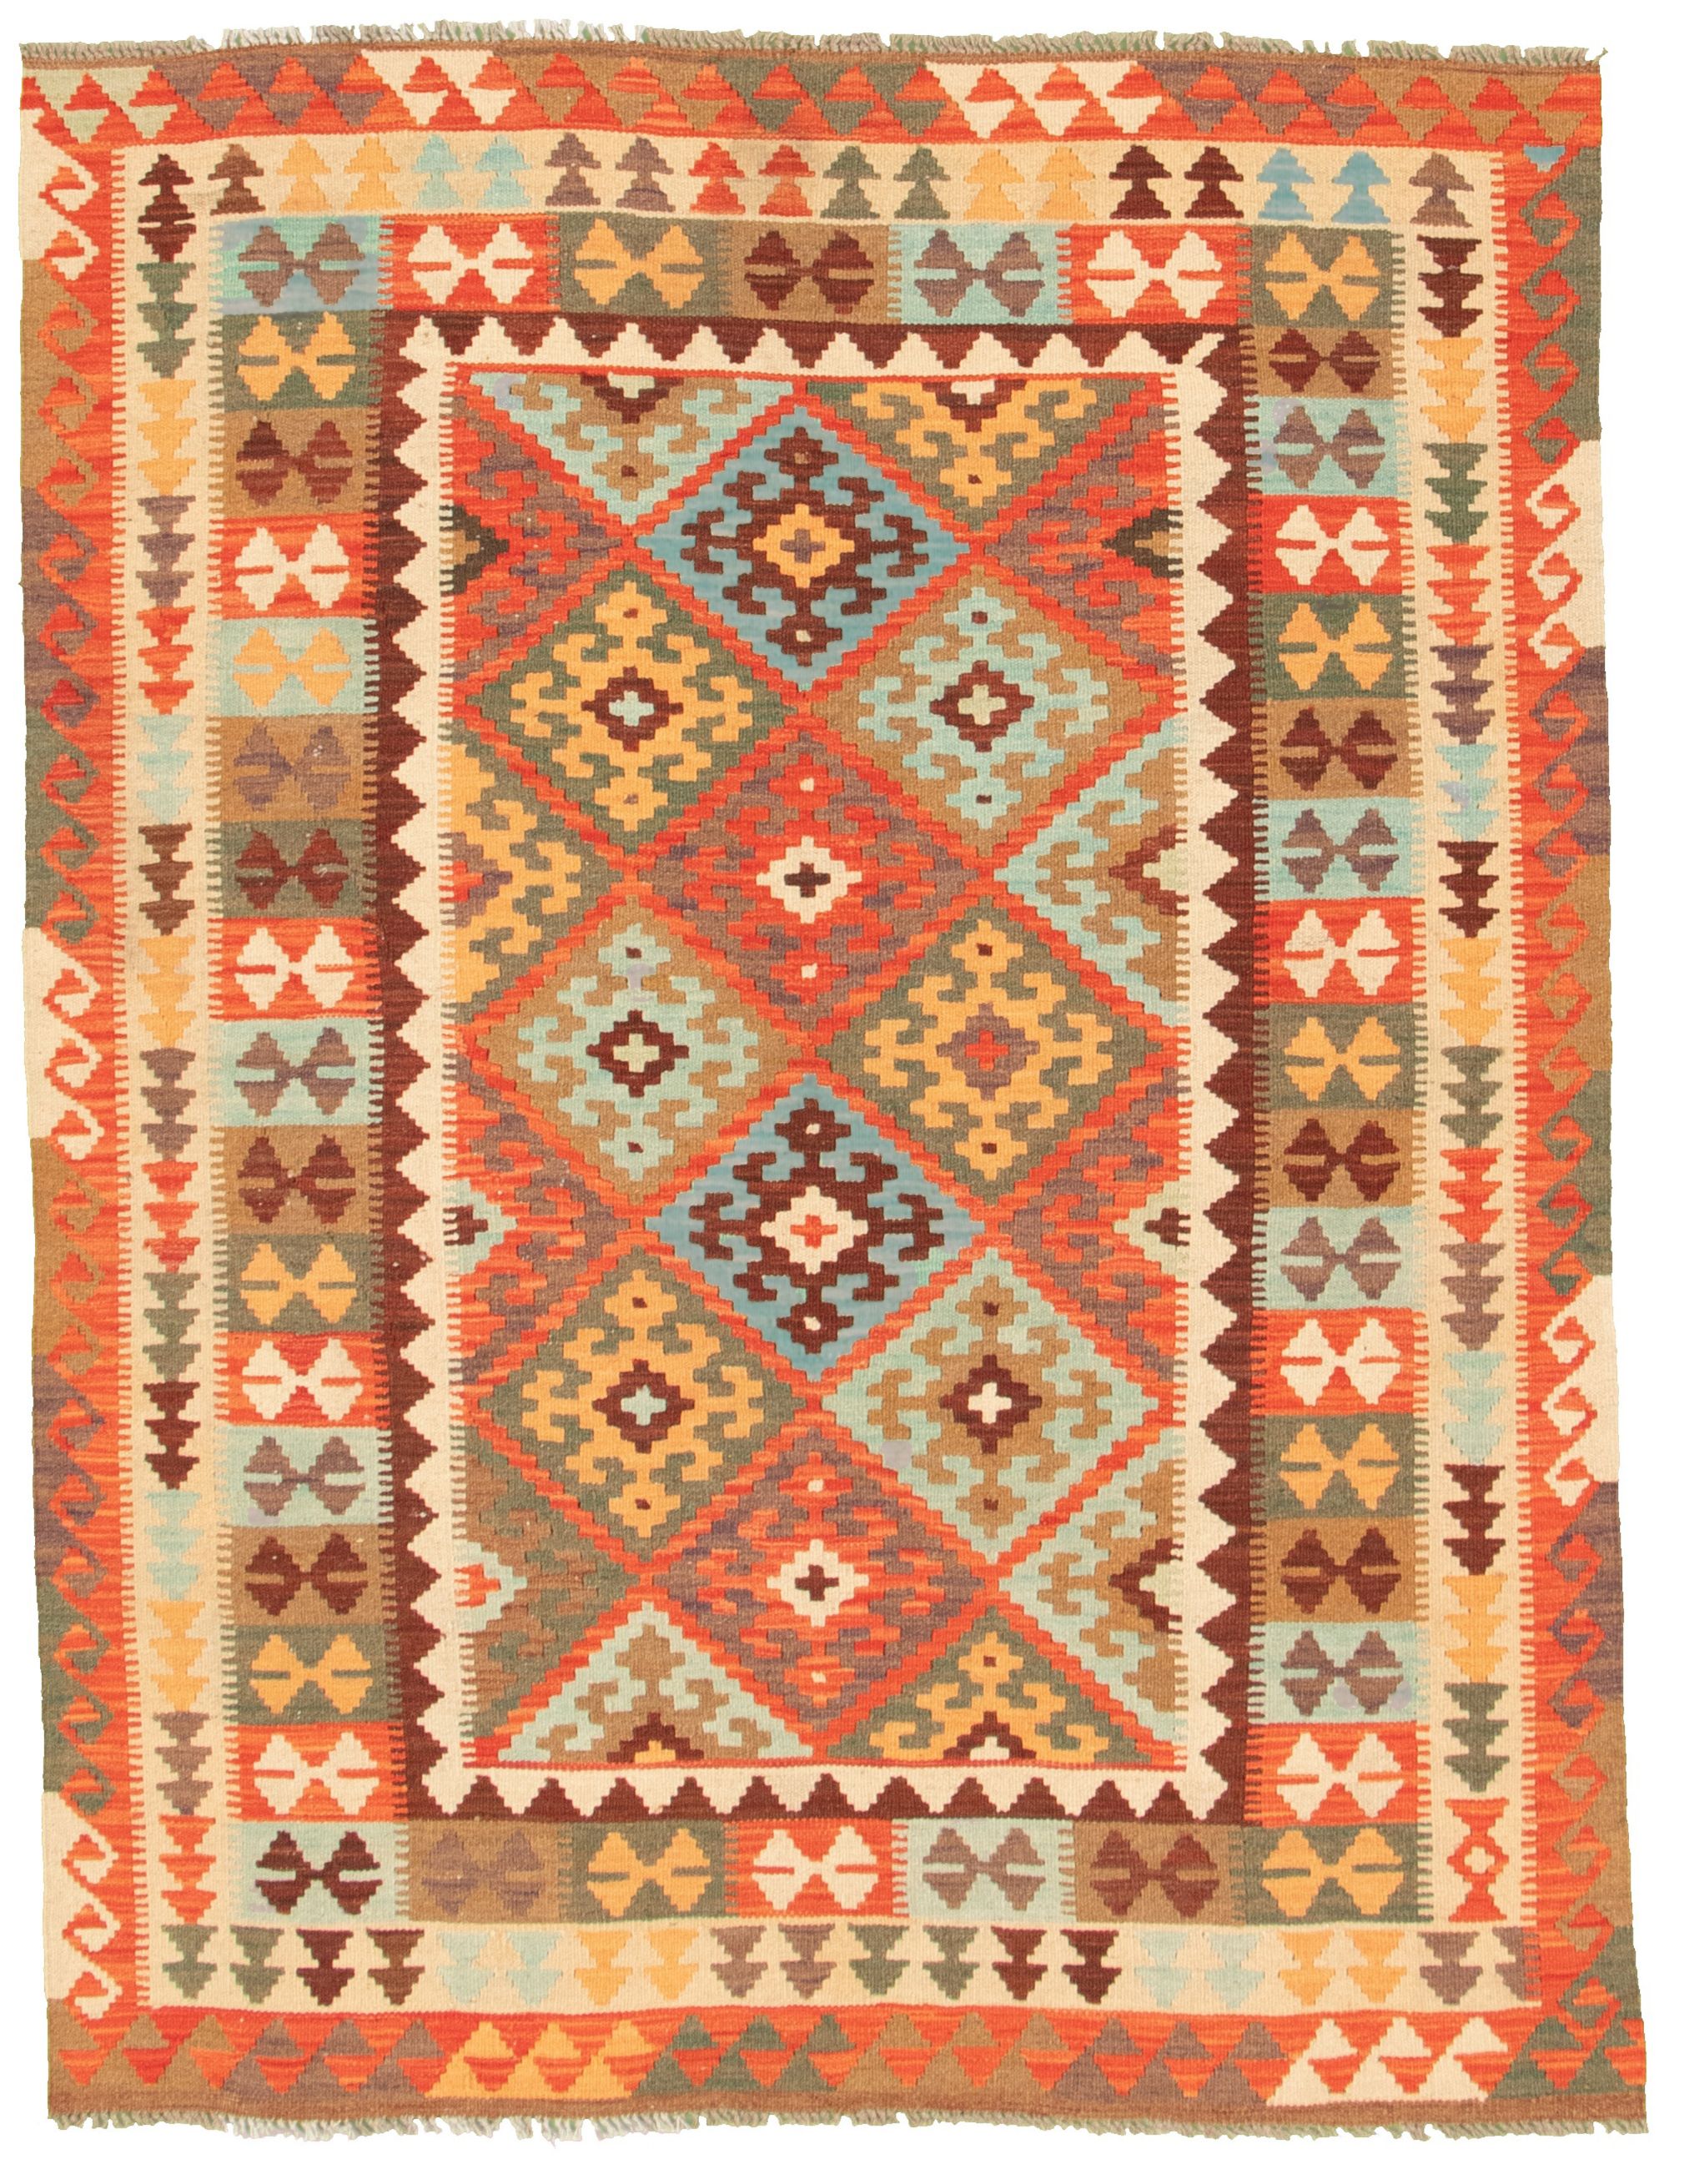 Hand woven Bold and Colorful  Red Wool Kilim 5'1" x 6'7" Size: 5'1" x 6'7"  